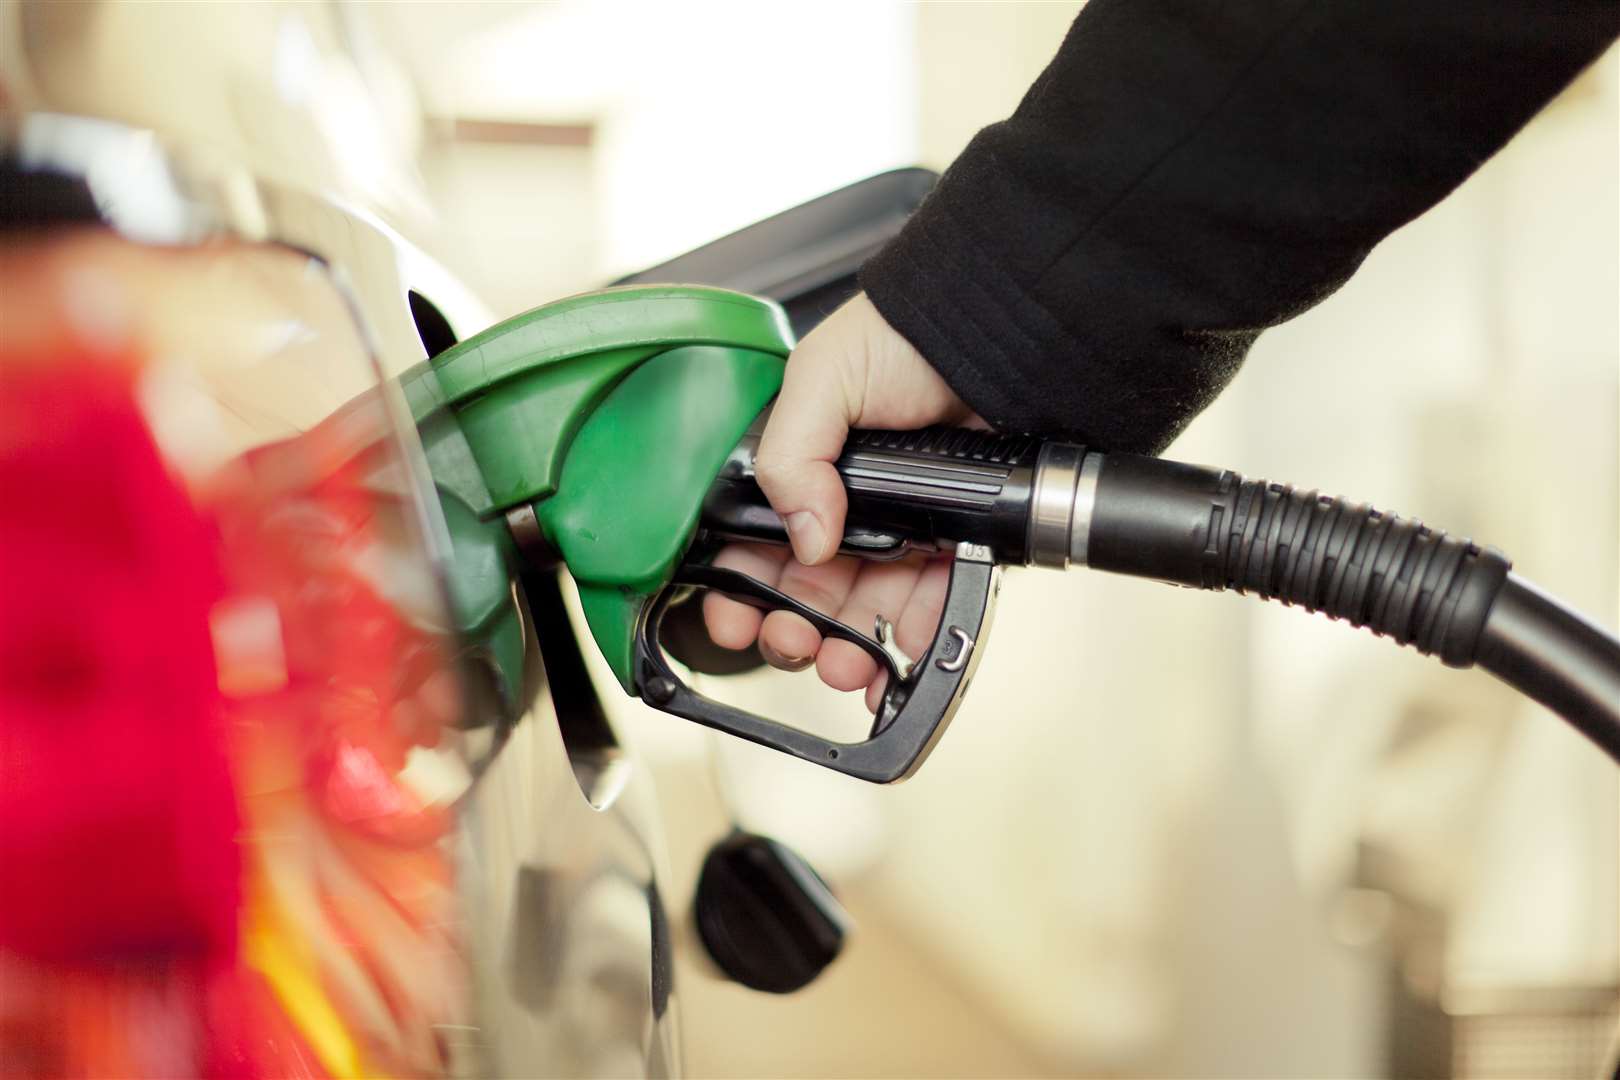 The bad news is that petrol and diesel prices continue to climb. Stock picture